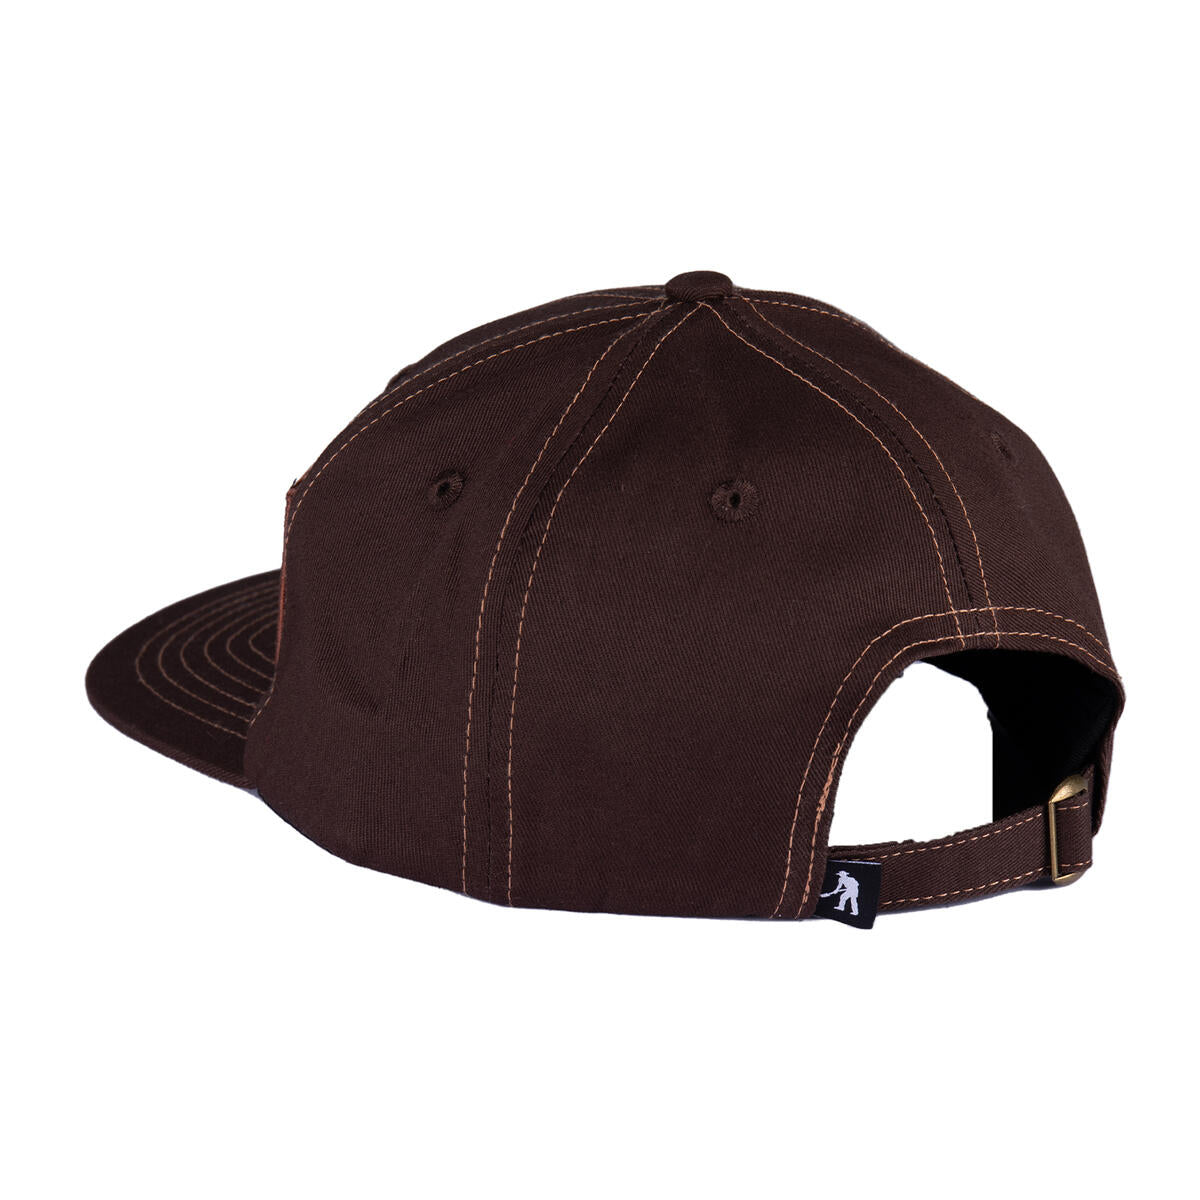 PASS~PORT SKATEBOARDS MAESTRO CASUAL CAP COLOR VARIANT